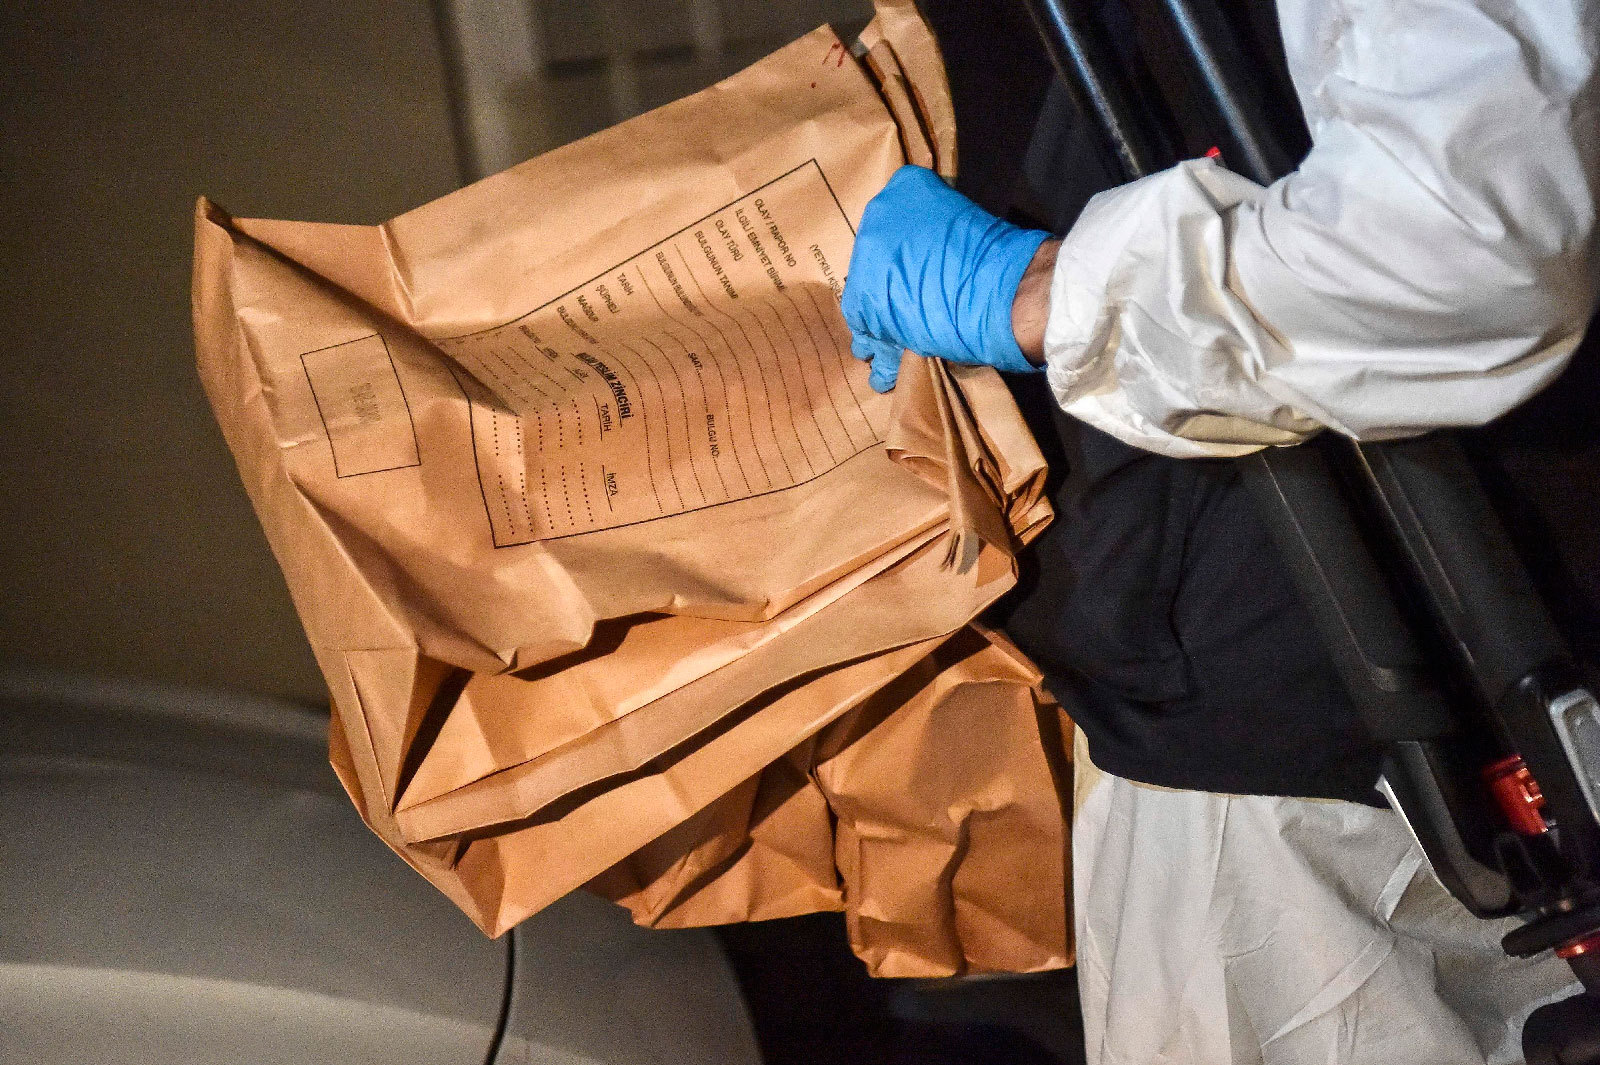 A Turkish forensic police officer carries evidence packs while he leaves the Saudi Arabian Consulate on October 18, 2018 in Istanbul.